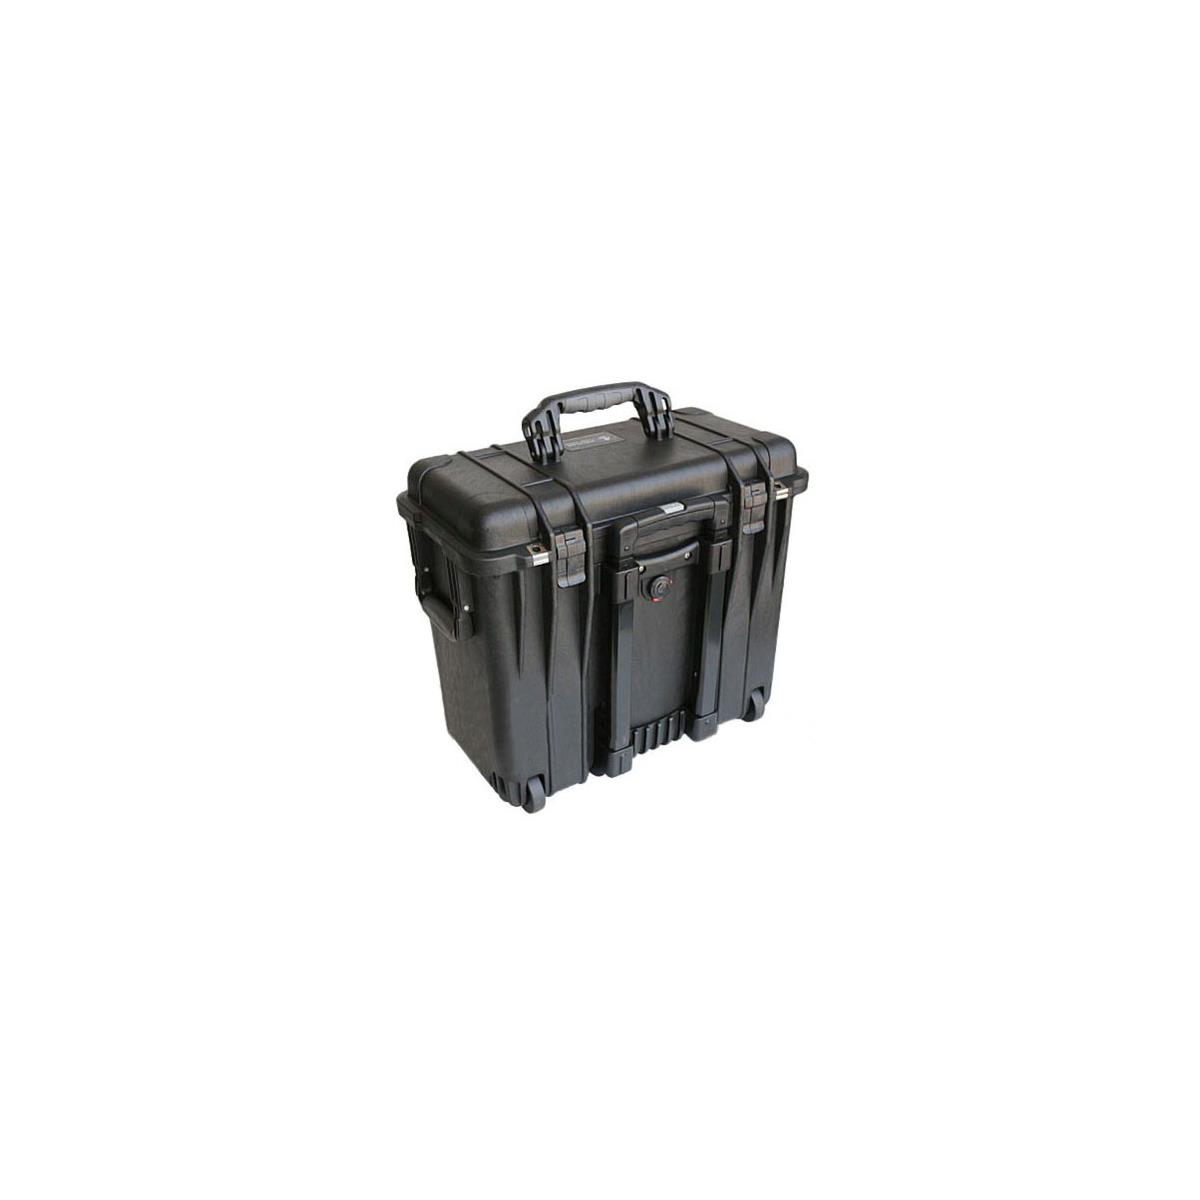 Image of Pelican 1440 Top Loader Hard Case with Wheels